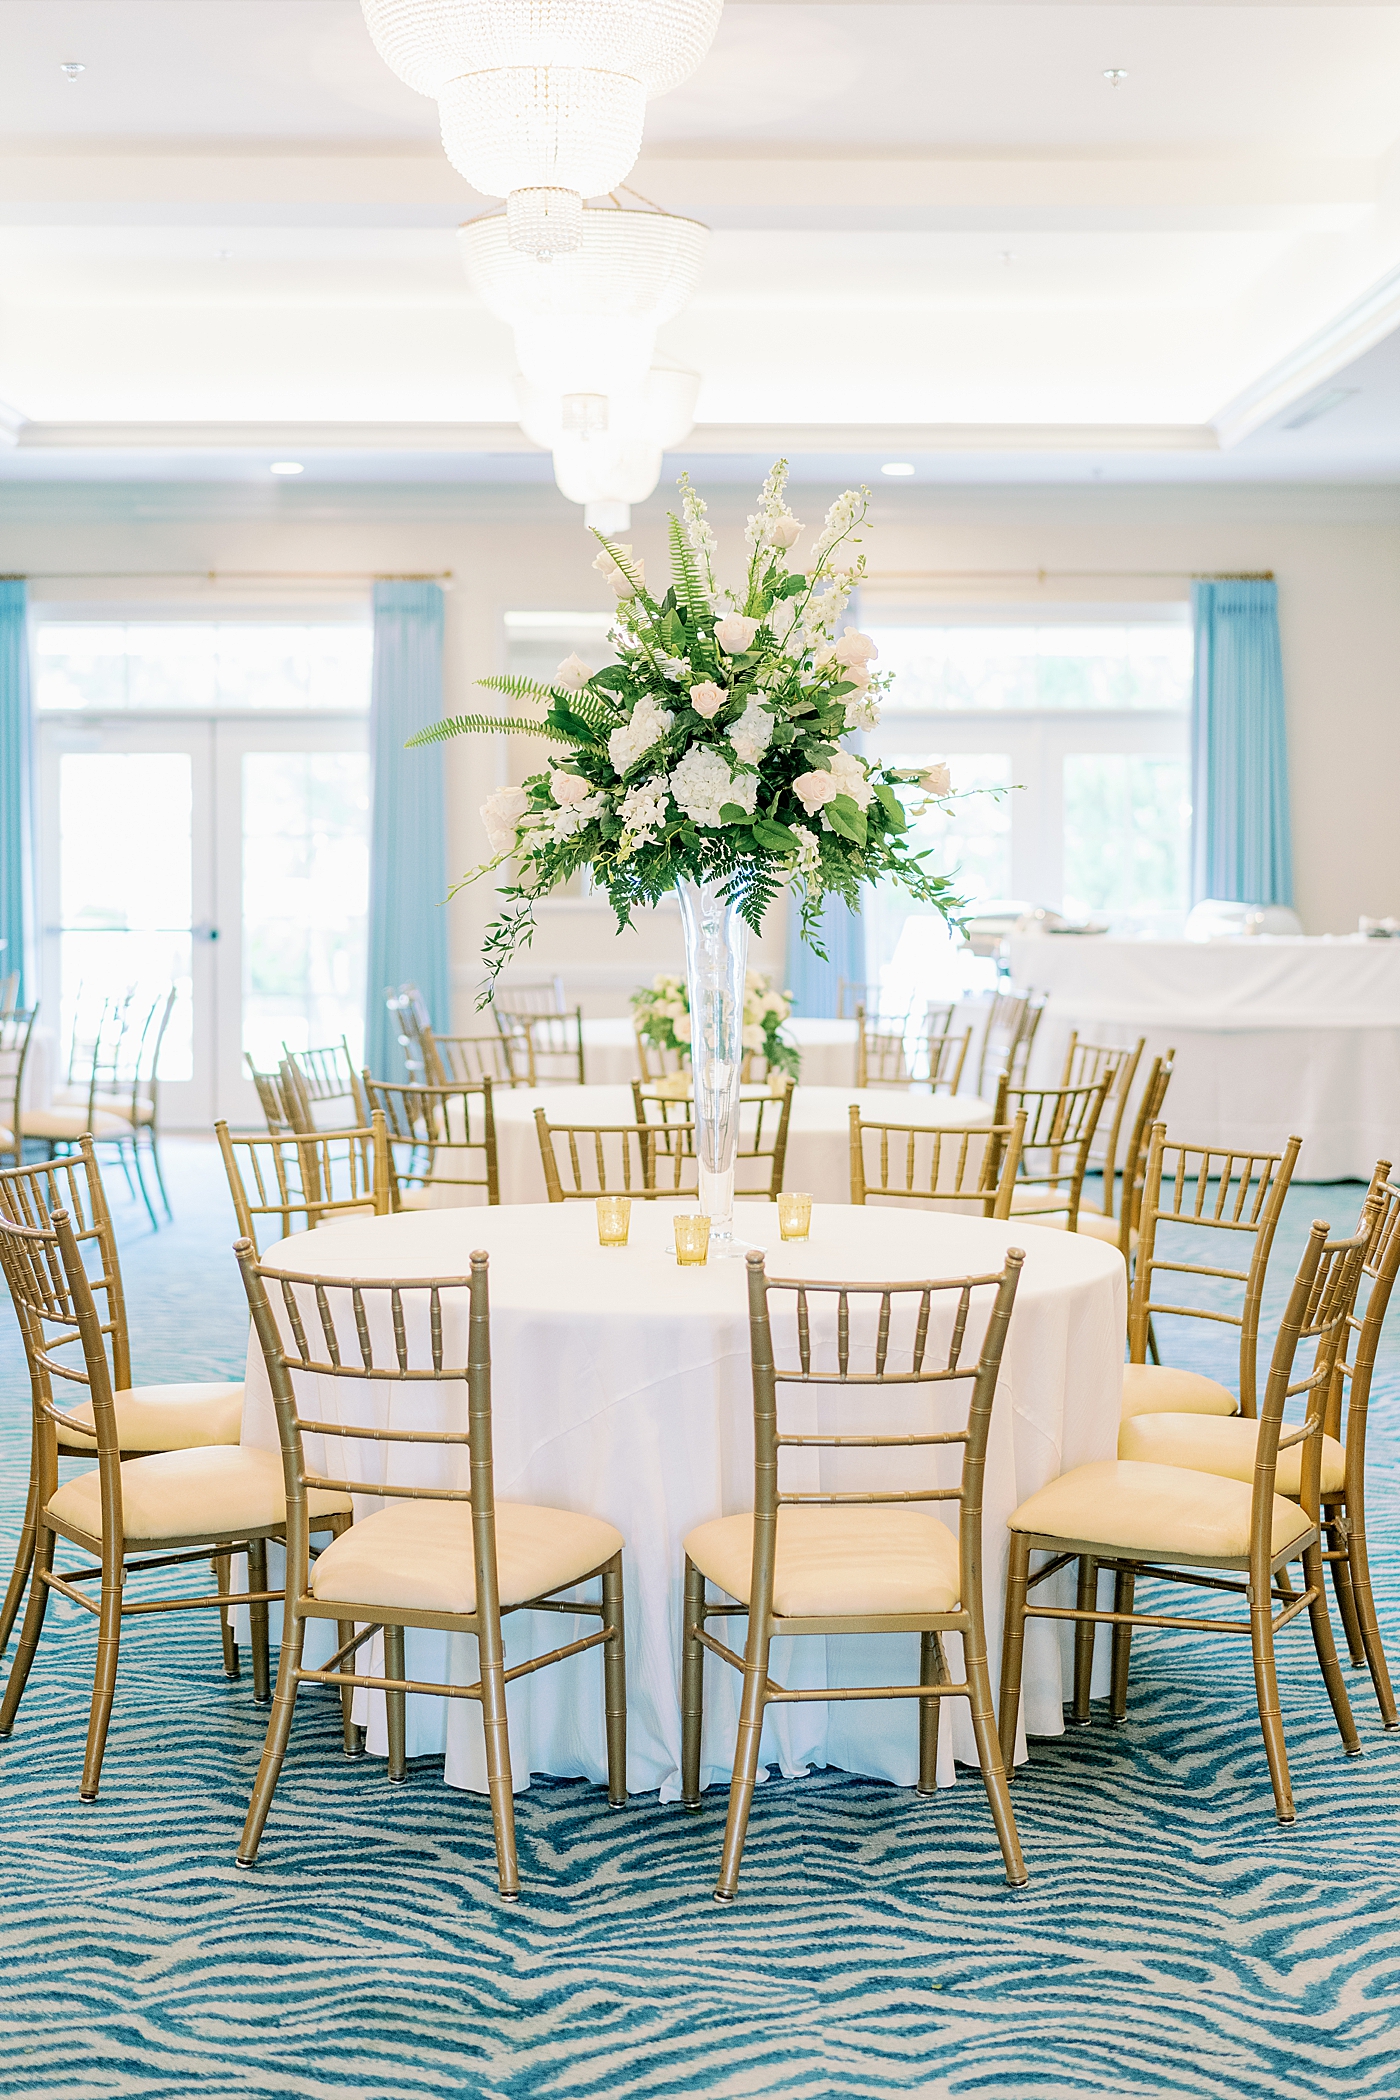 Wedding reception detail at Simple Southern Country Club Wedding | Image by Annie Laura Photo